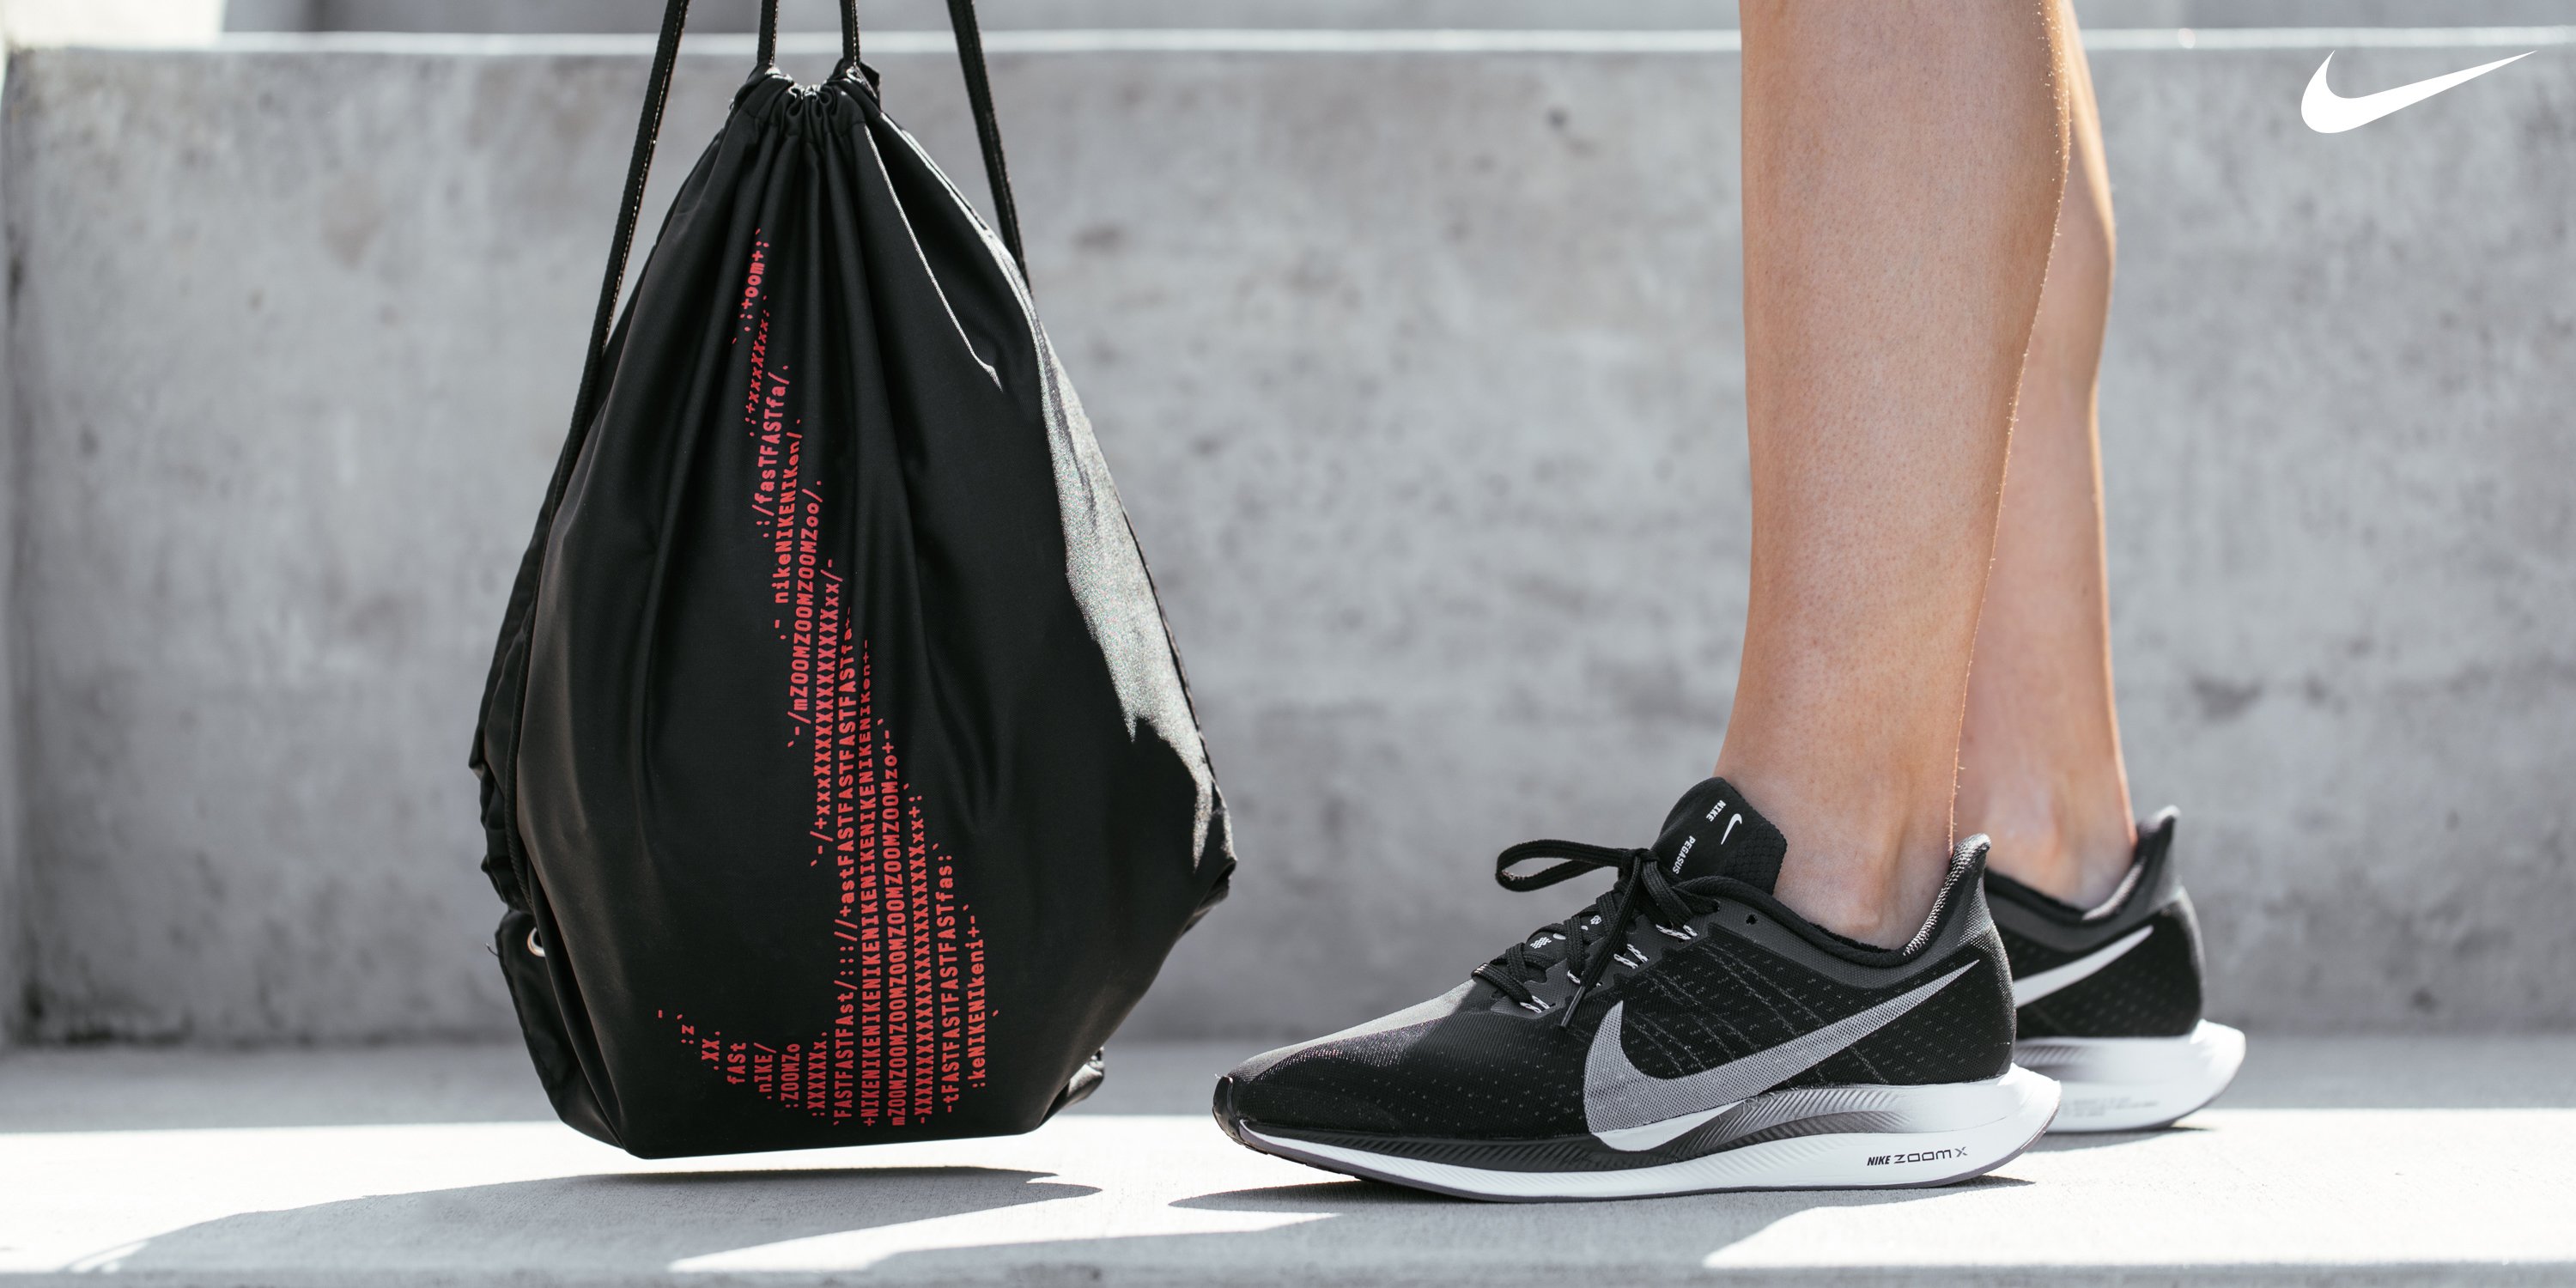 Nike on Twitter: "The Pegasus, turbocharged. Receive an exclusive synch bag by taking a screenshot of this post &amp; visiting Nike Downtown to claim your bag. Limit one per person while